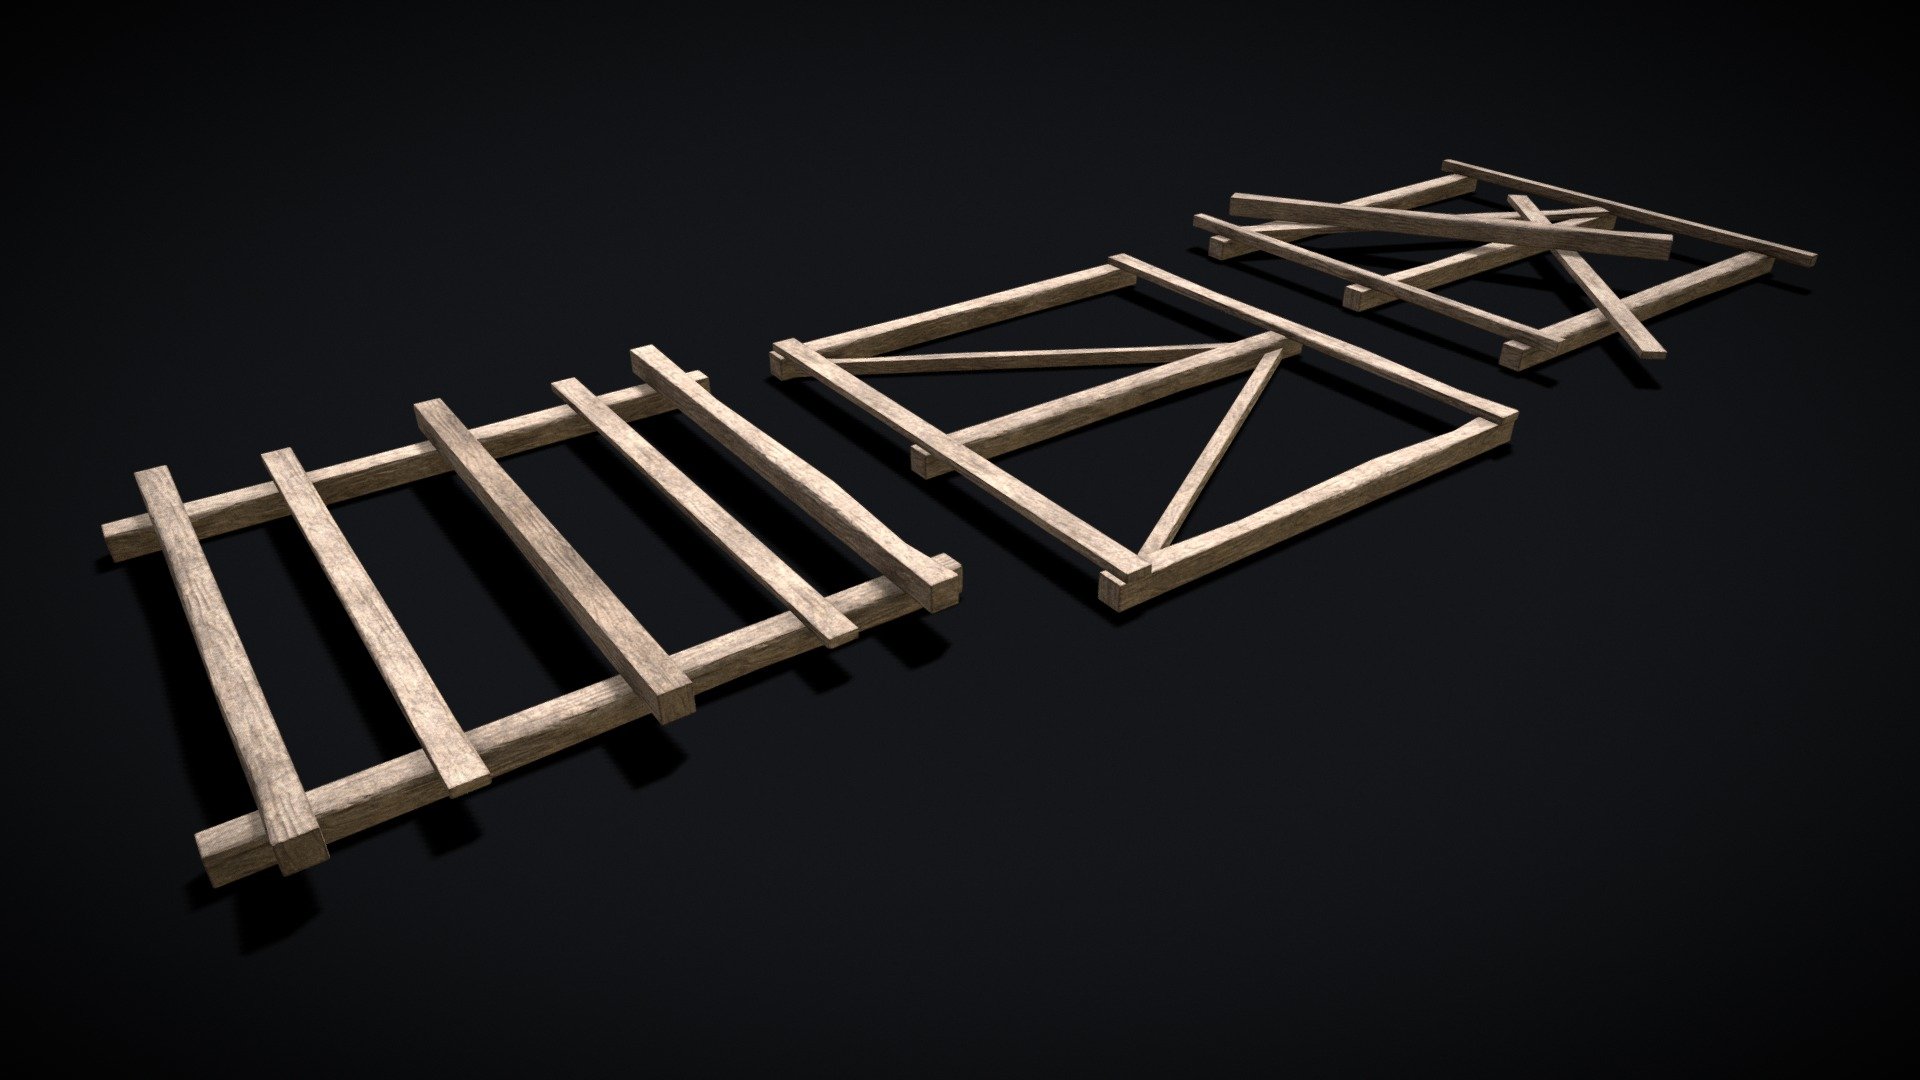 Construction_Wood_Piles_FBX
VR / AR / Low-poly
PBR
GeometryPolygon mesh
Polygons1,980
Vertices2,024
Textures - Construction Wood Piles - Buy Royalty Free 3D model by GetDeadEntertainment 3d model